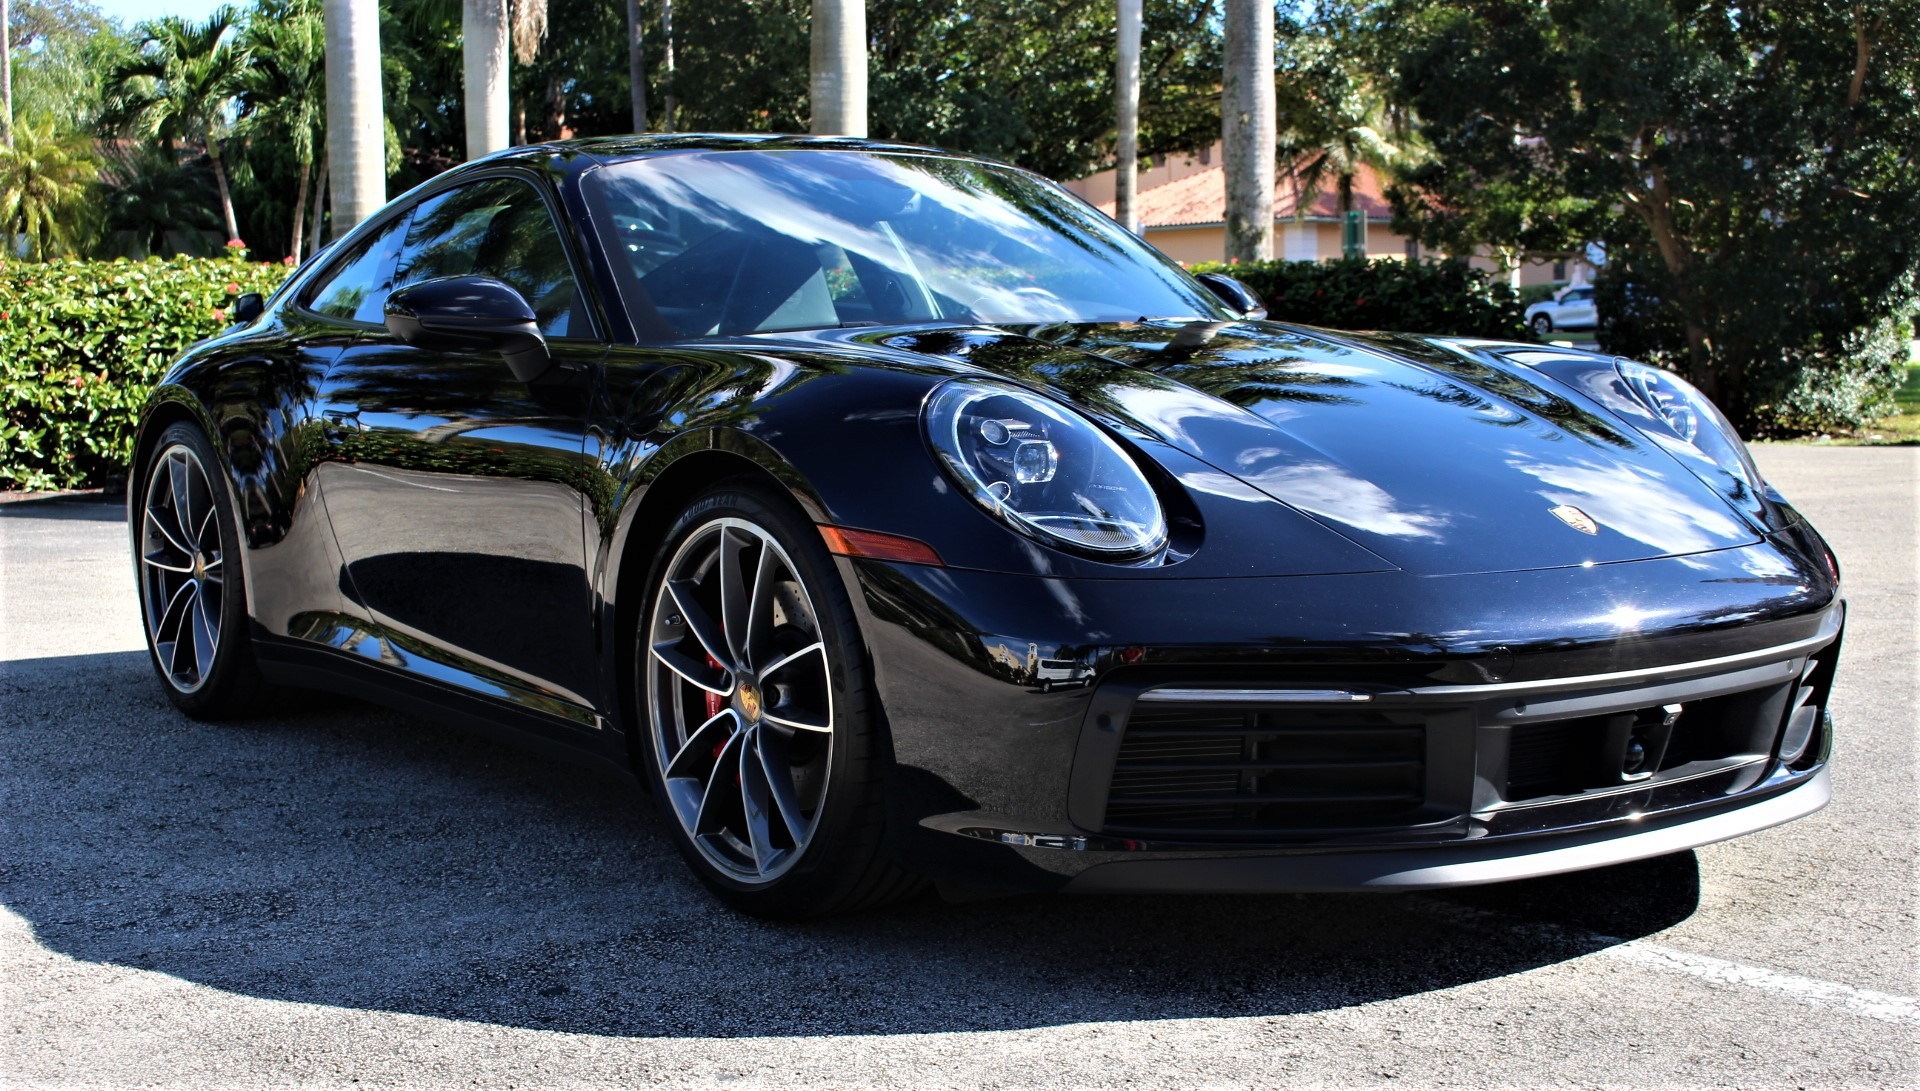 Used 2020 Porsche 911 Carrera S for sale Sold at The Gables Sports Cars in Miami FL 33146 2